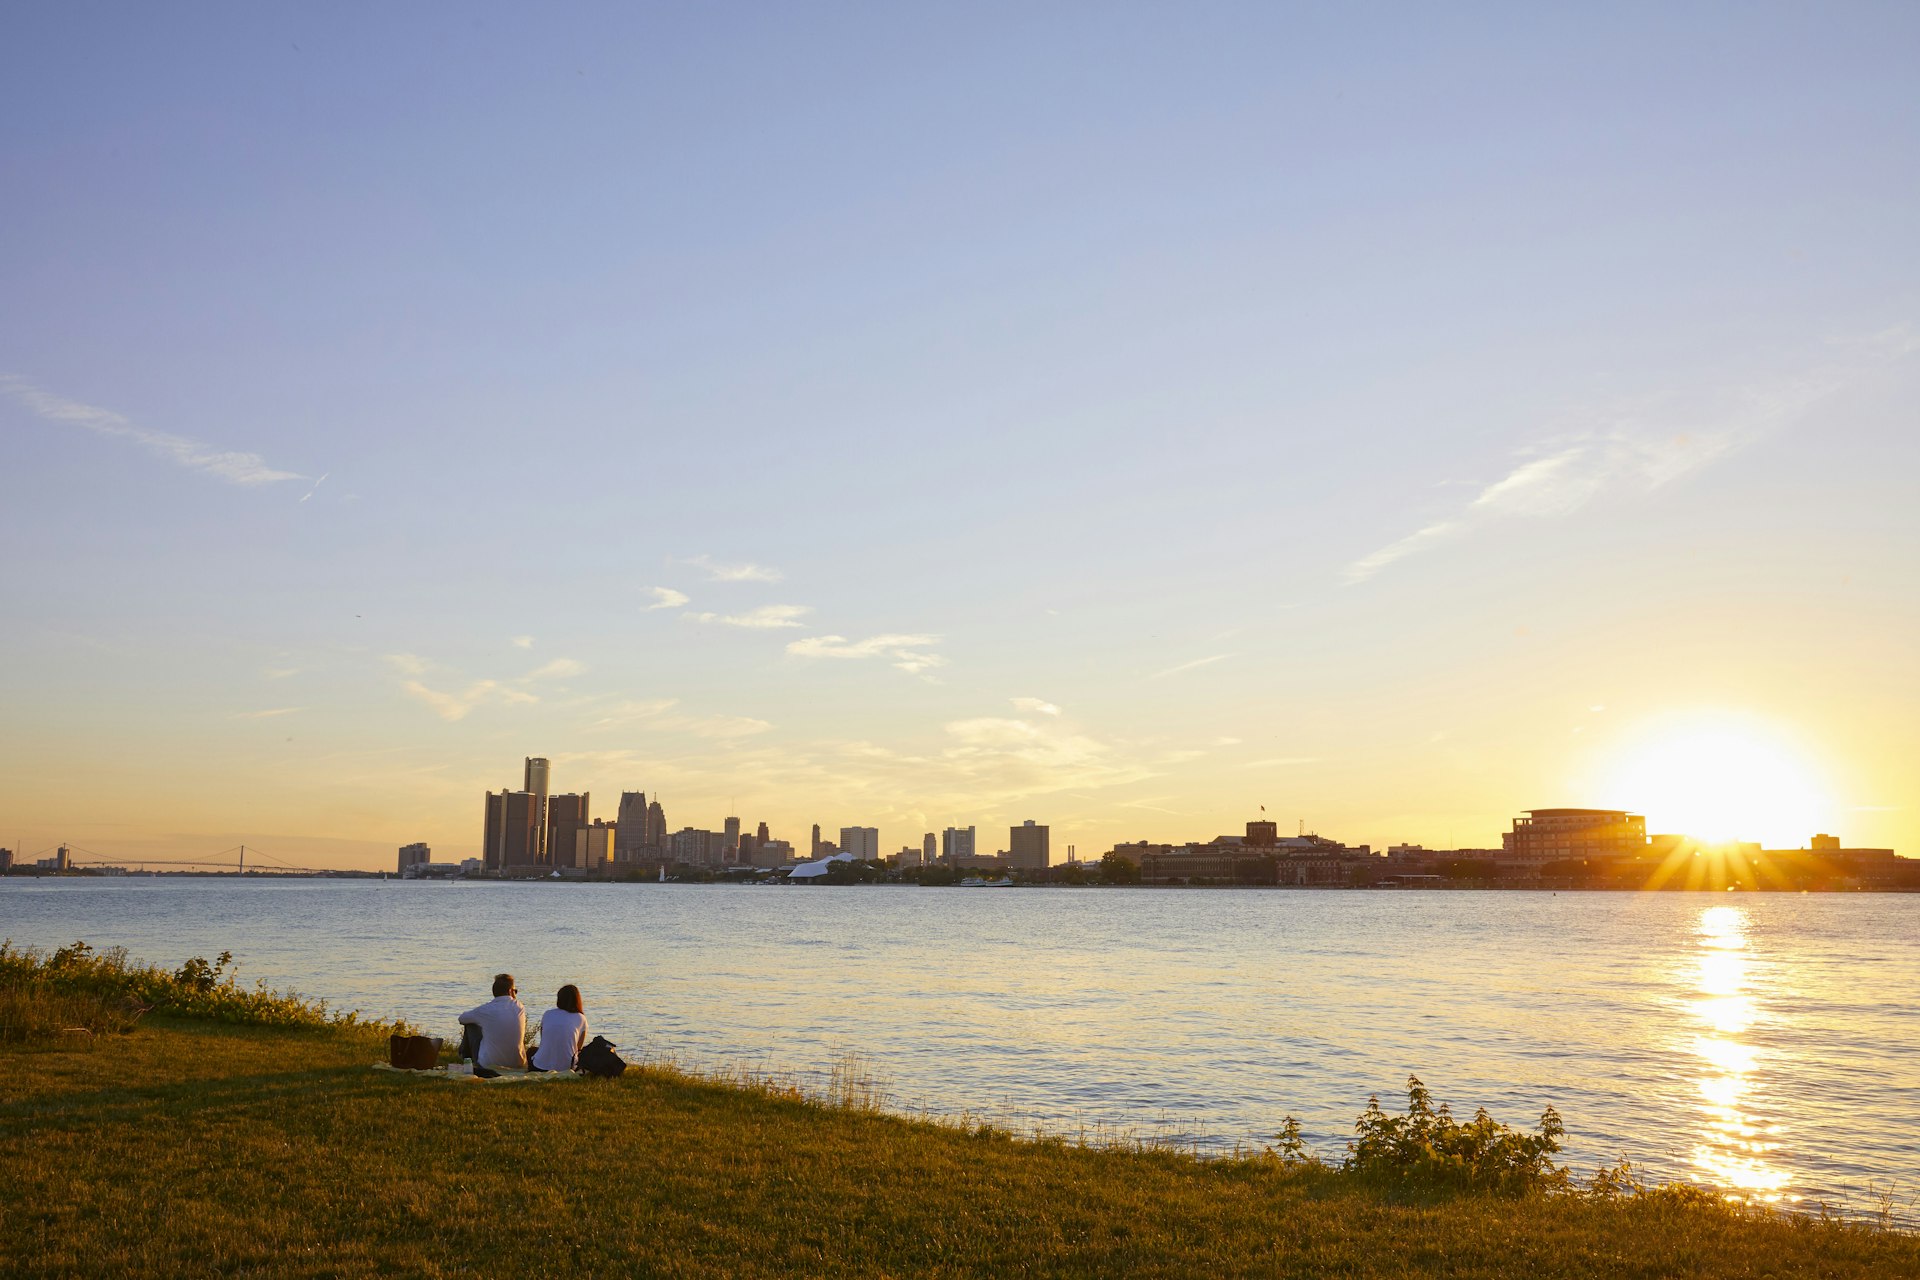 Sunset over Detroit as seen from Belle Isle in the Detroit River